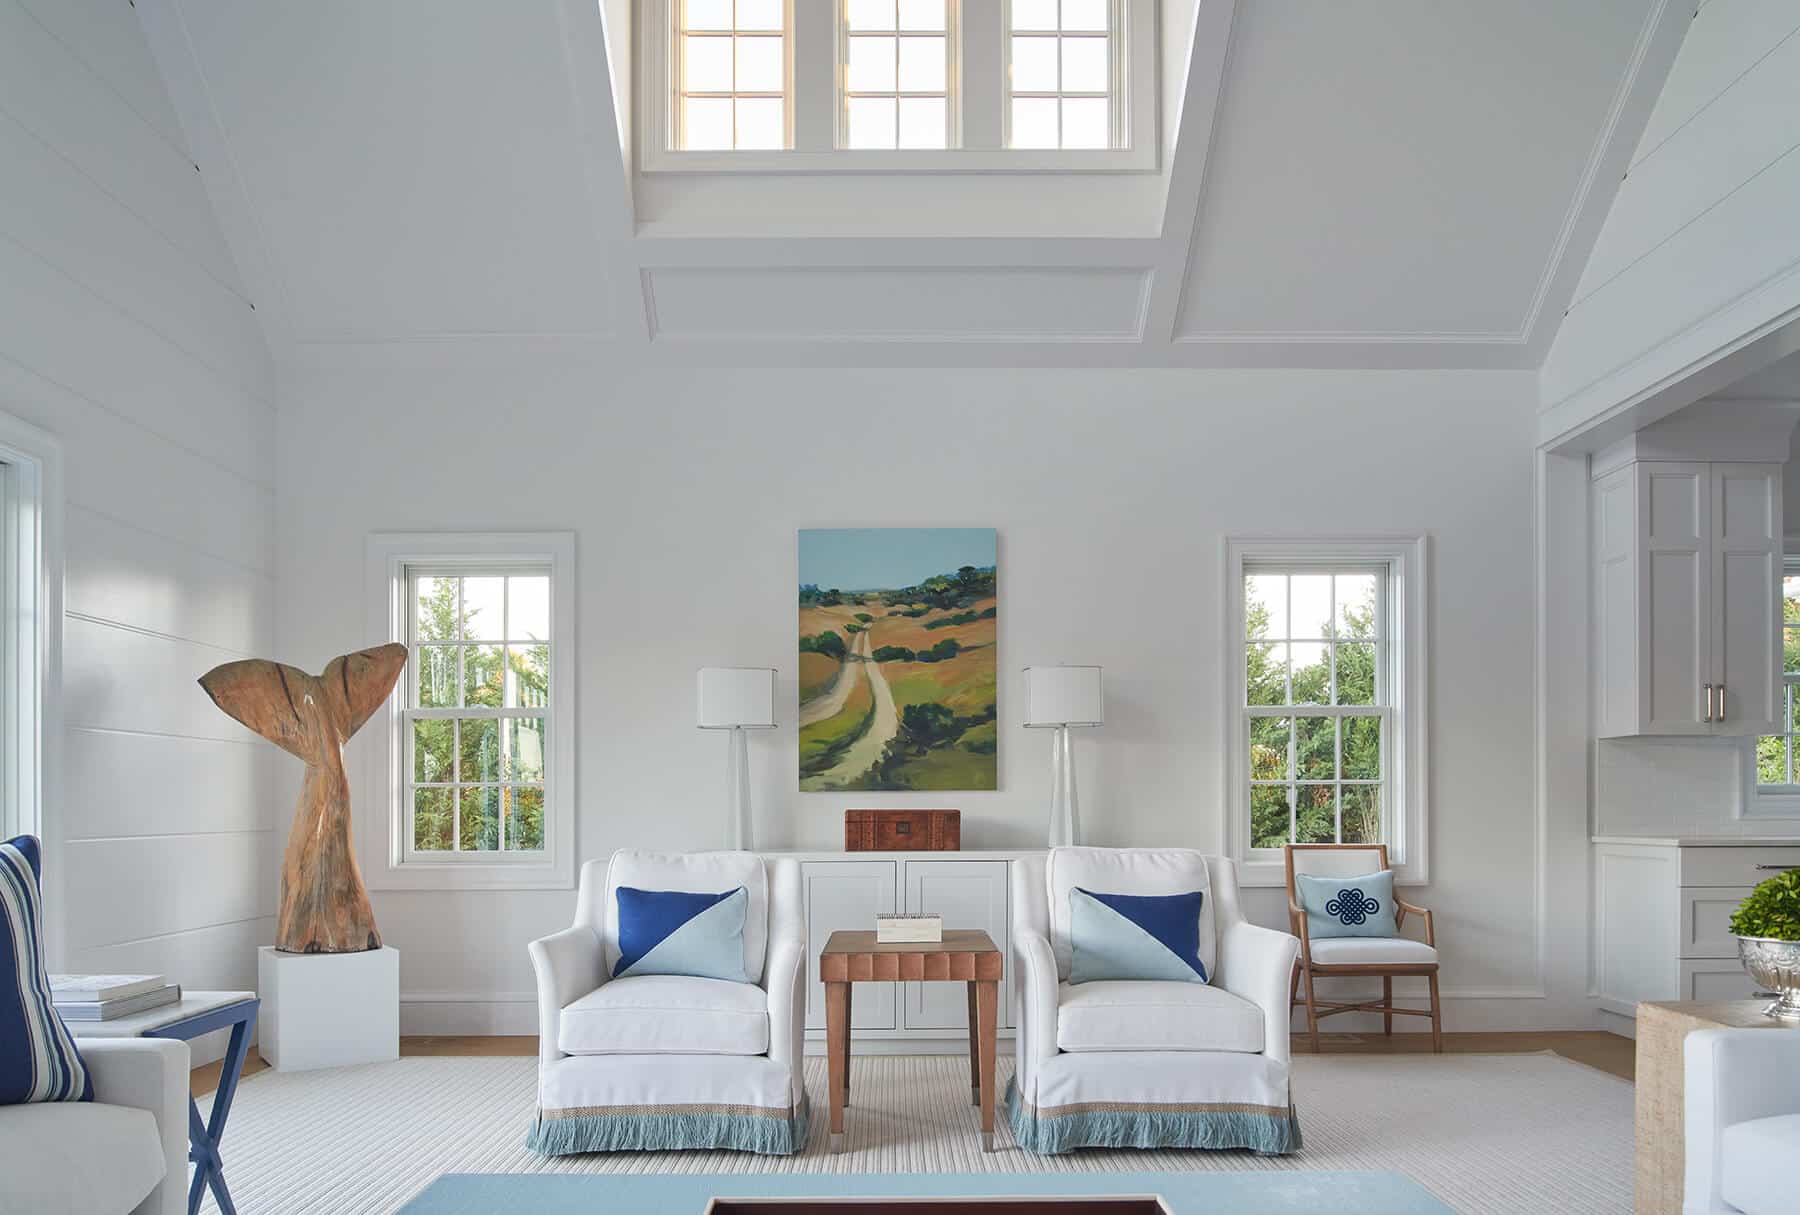 Nantucket, living room with sculpture, painting, and chairs